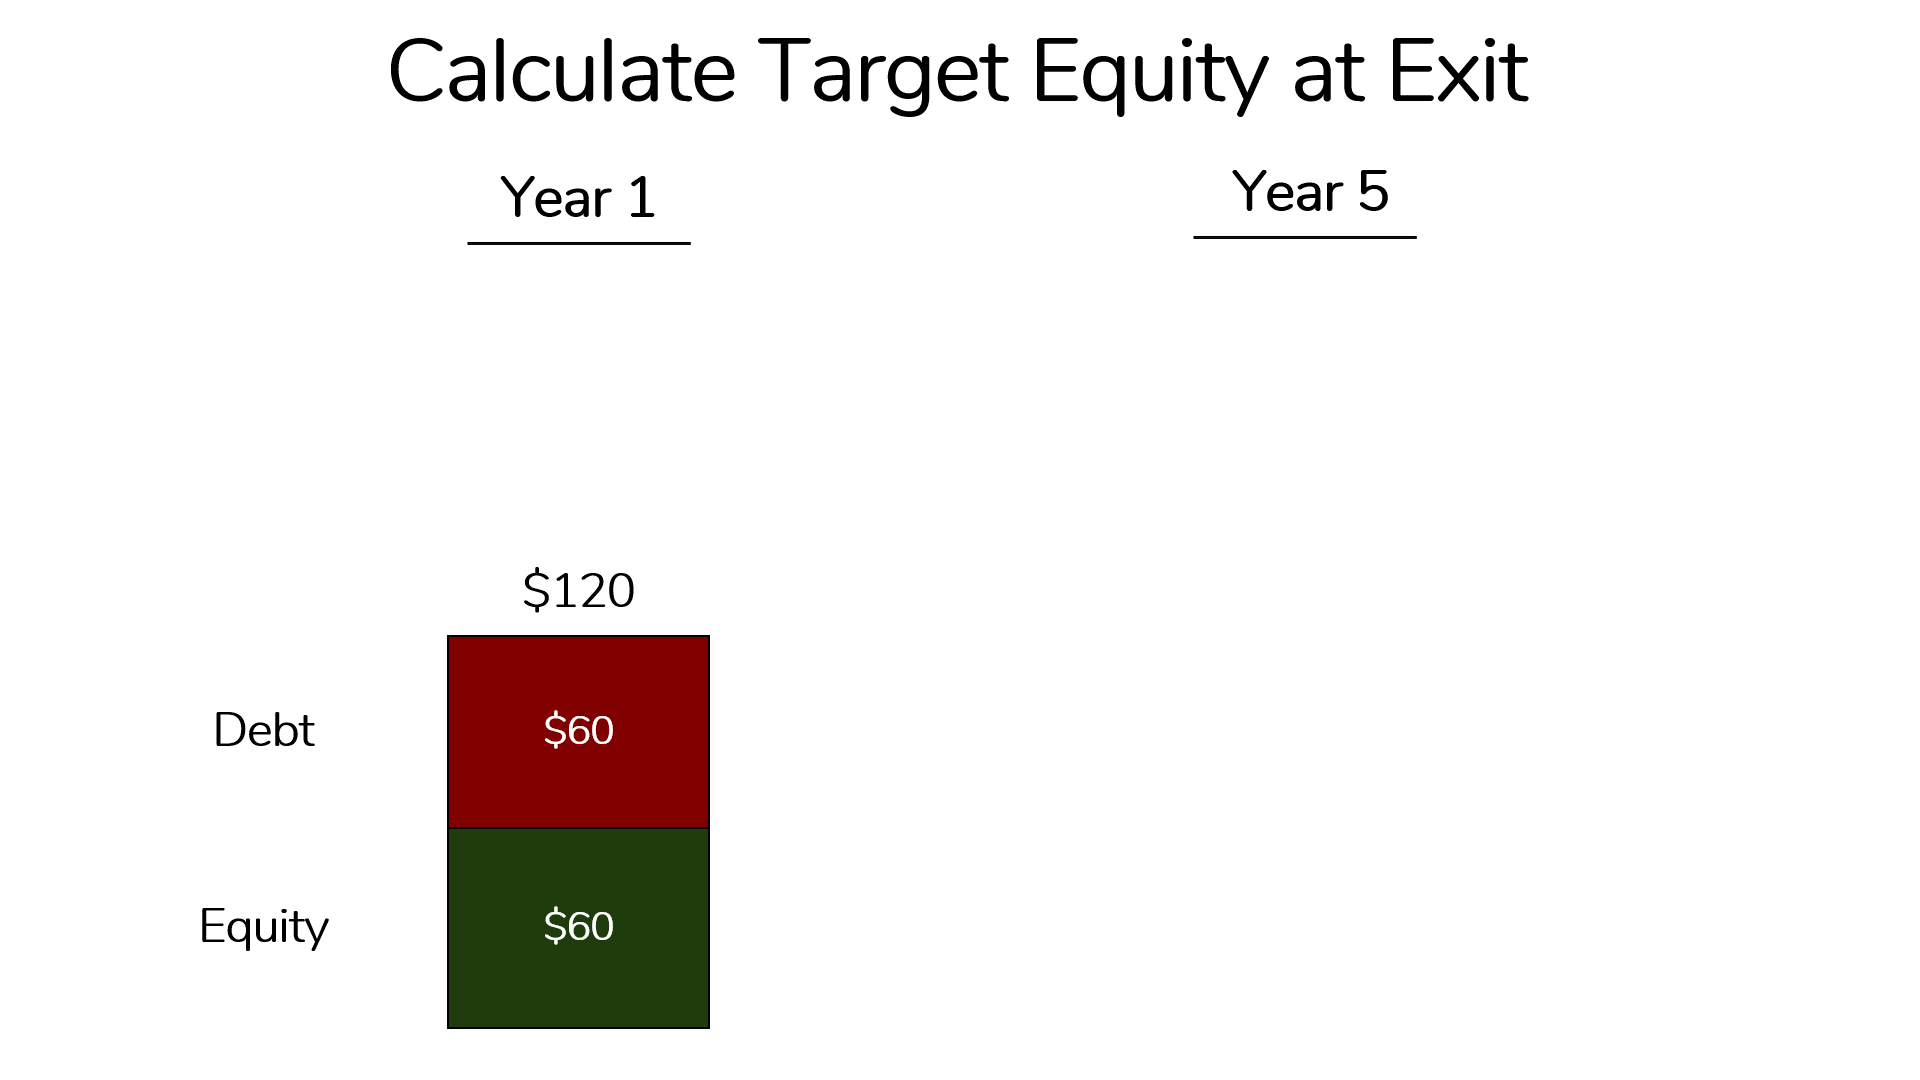 an image showing how to calculate exit equity value for the reverse paper LBO.